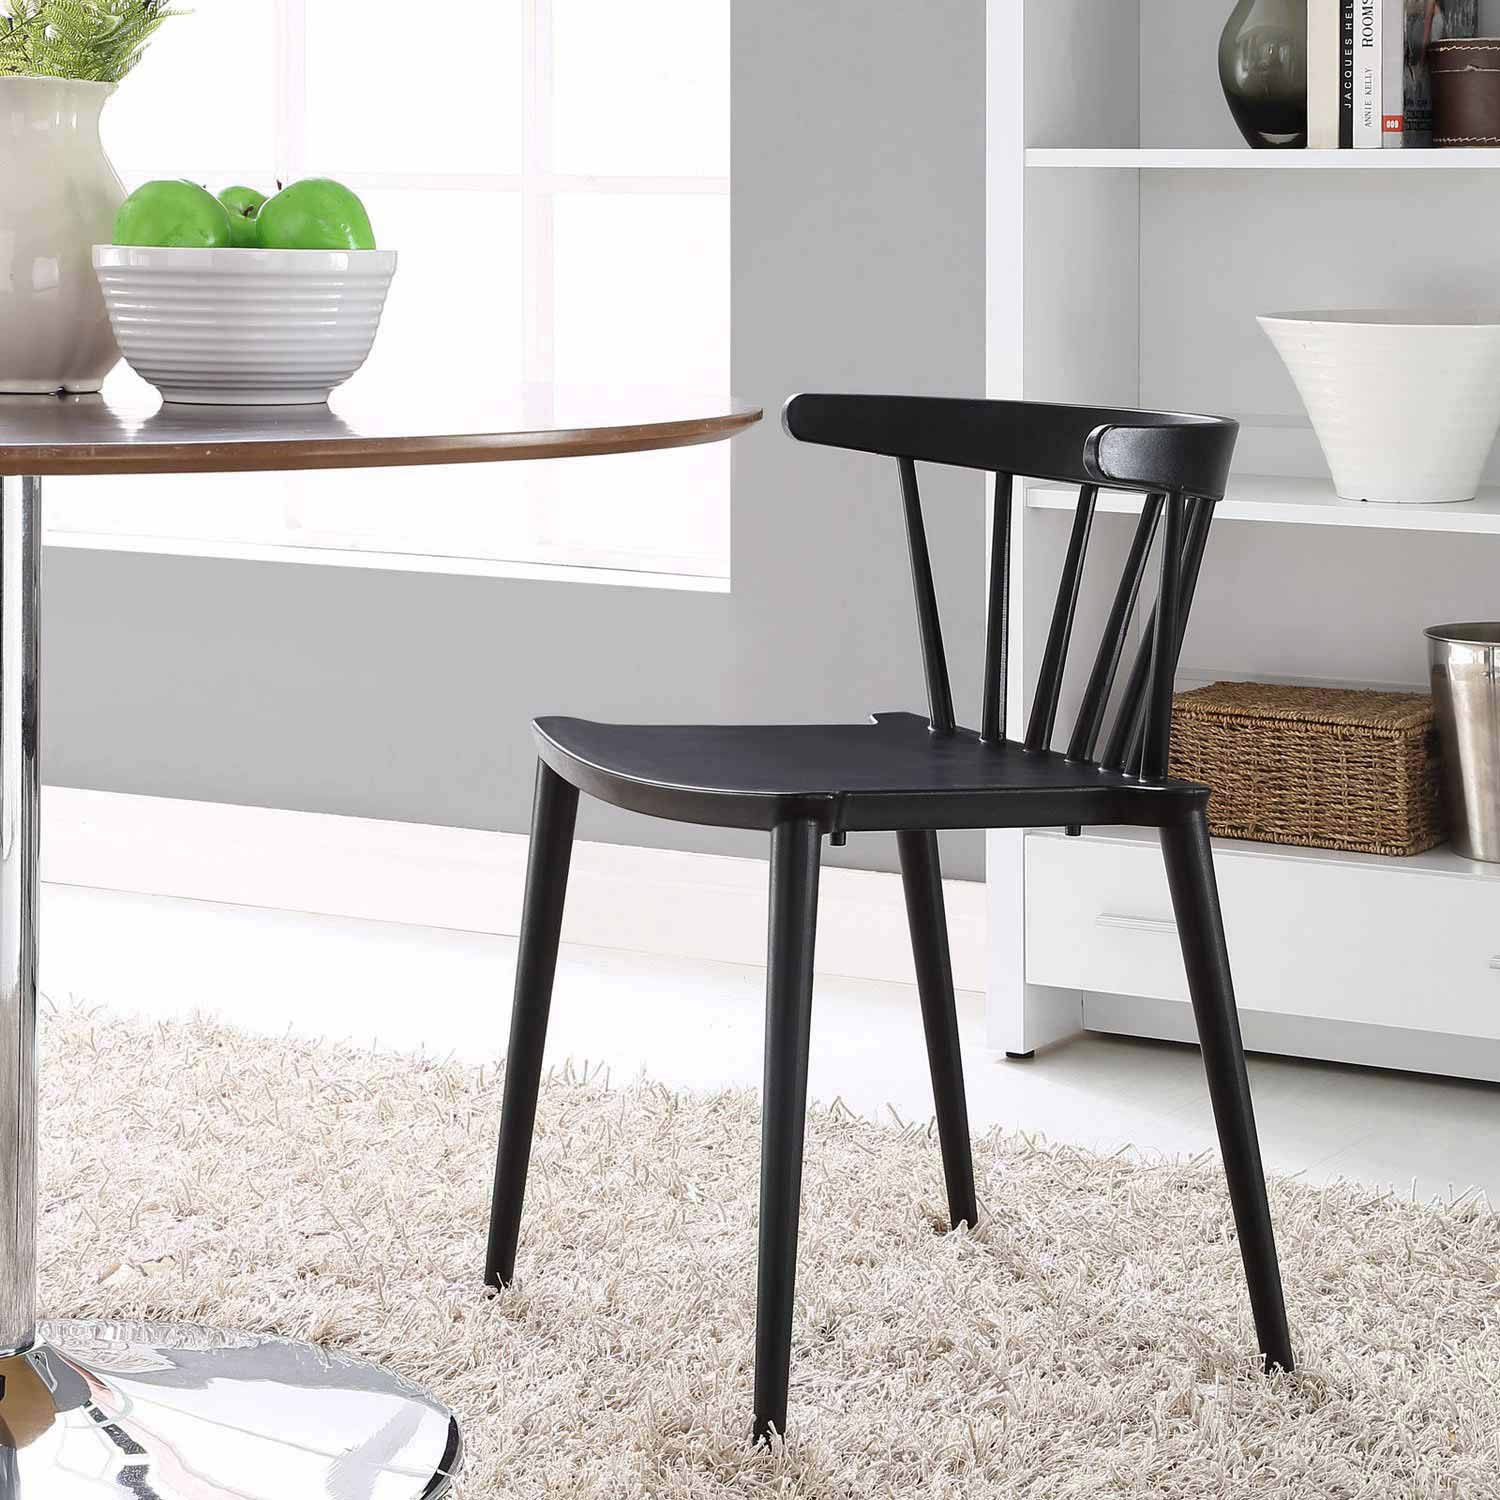 Modway Spindle Dining Side Chair - Black